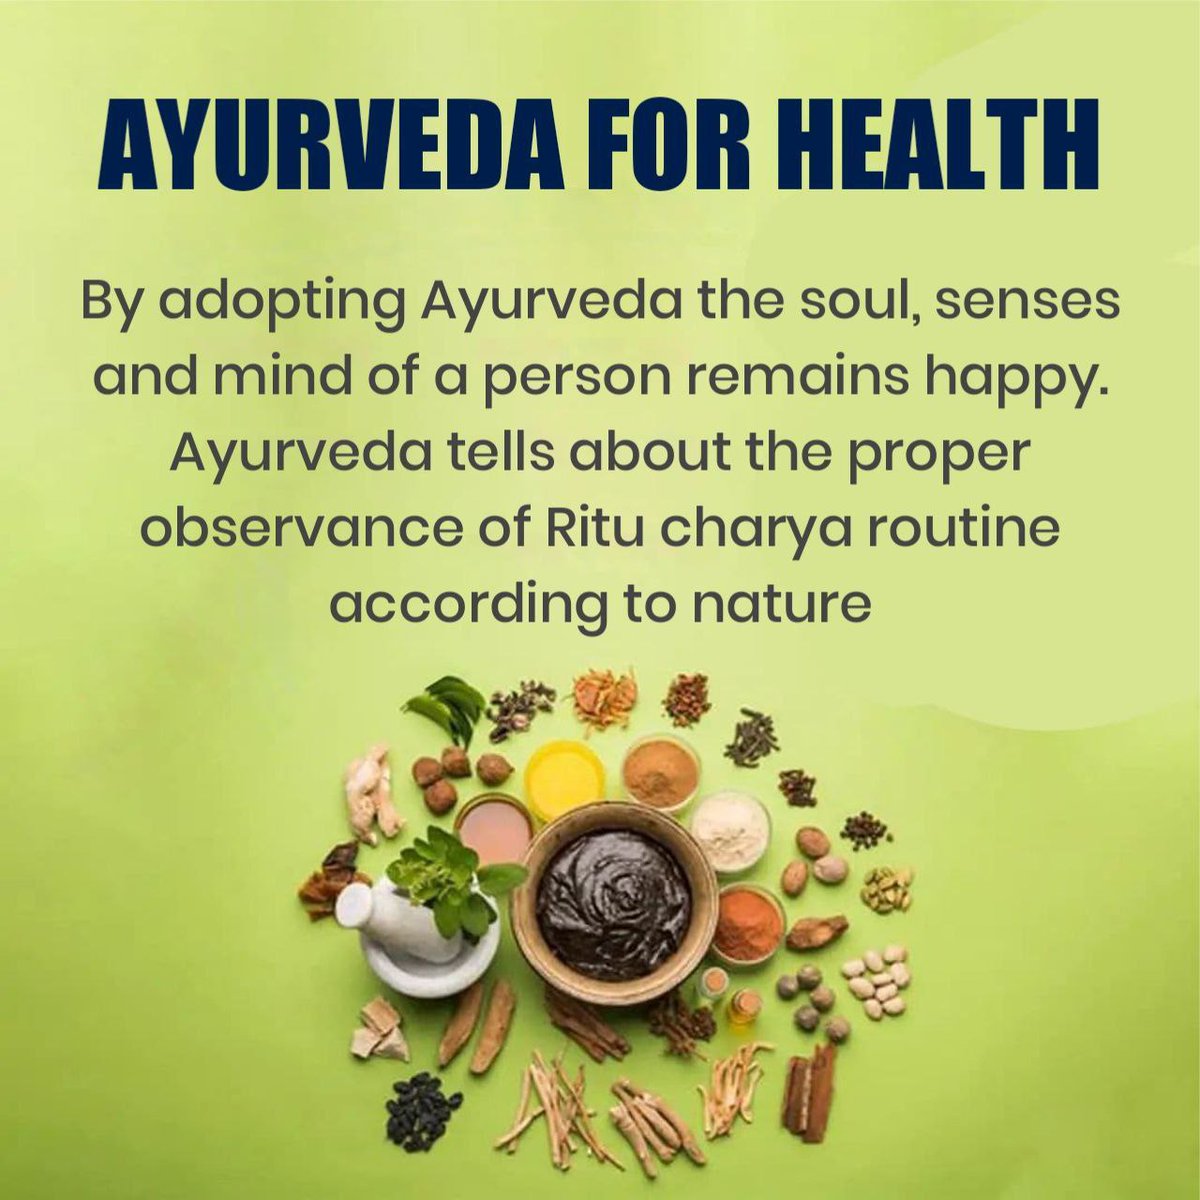 Sant Shri Asharamji Bapu has always emphasised on Healthy Living. Ayurveda plays an important role in Wellness Journey as it doesn't have any side effects. #आयुर्वेदामृत